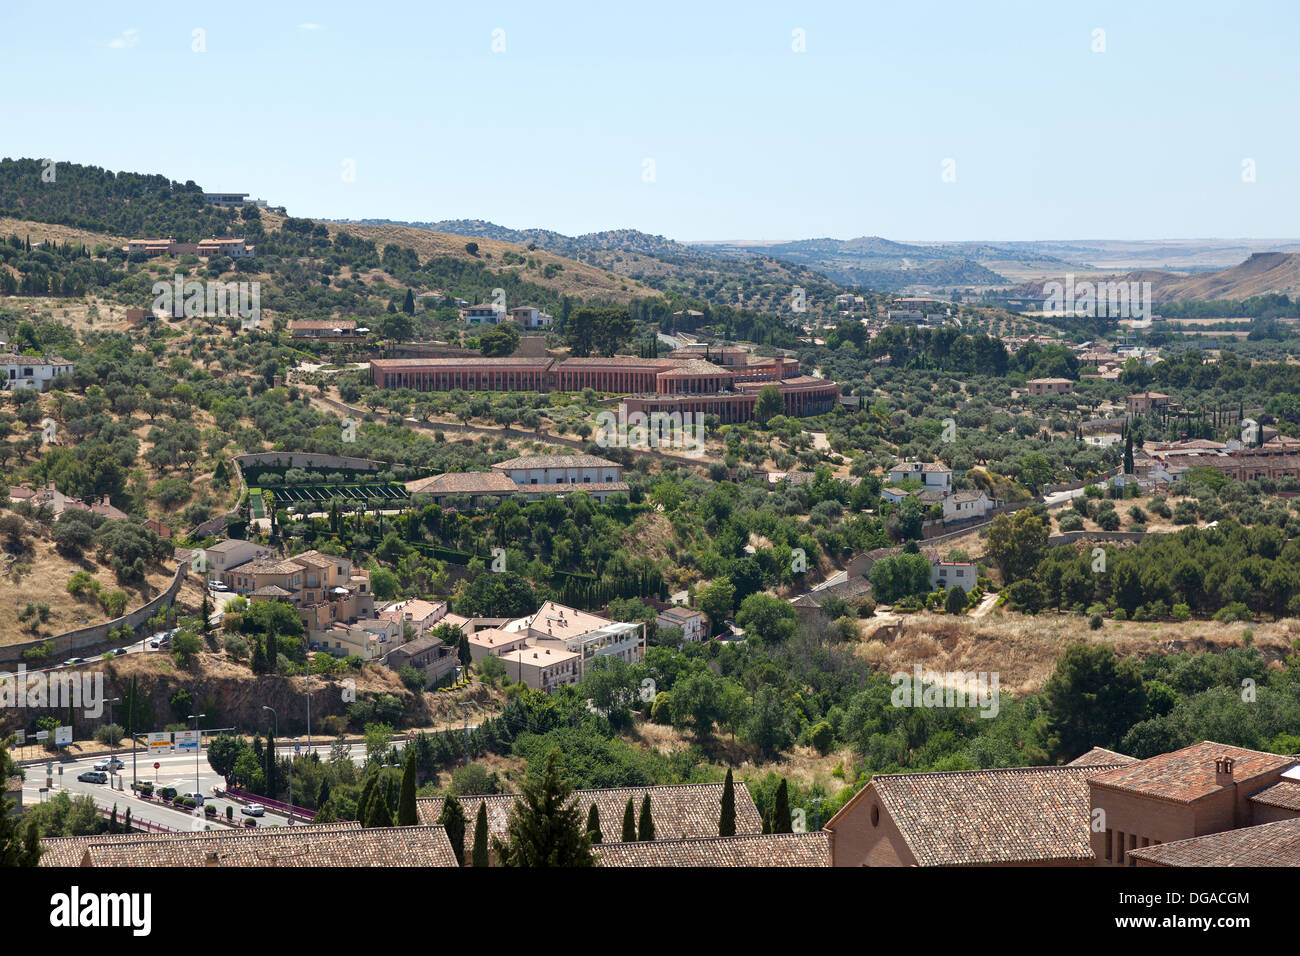 View from the city of Toledo to the hills, Spain Stock Photo